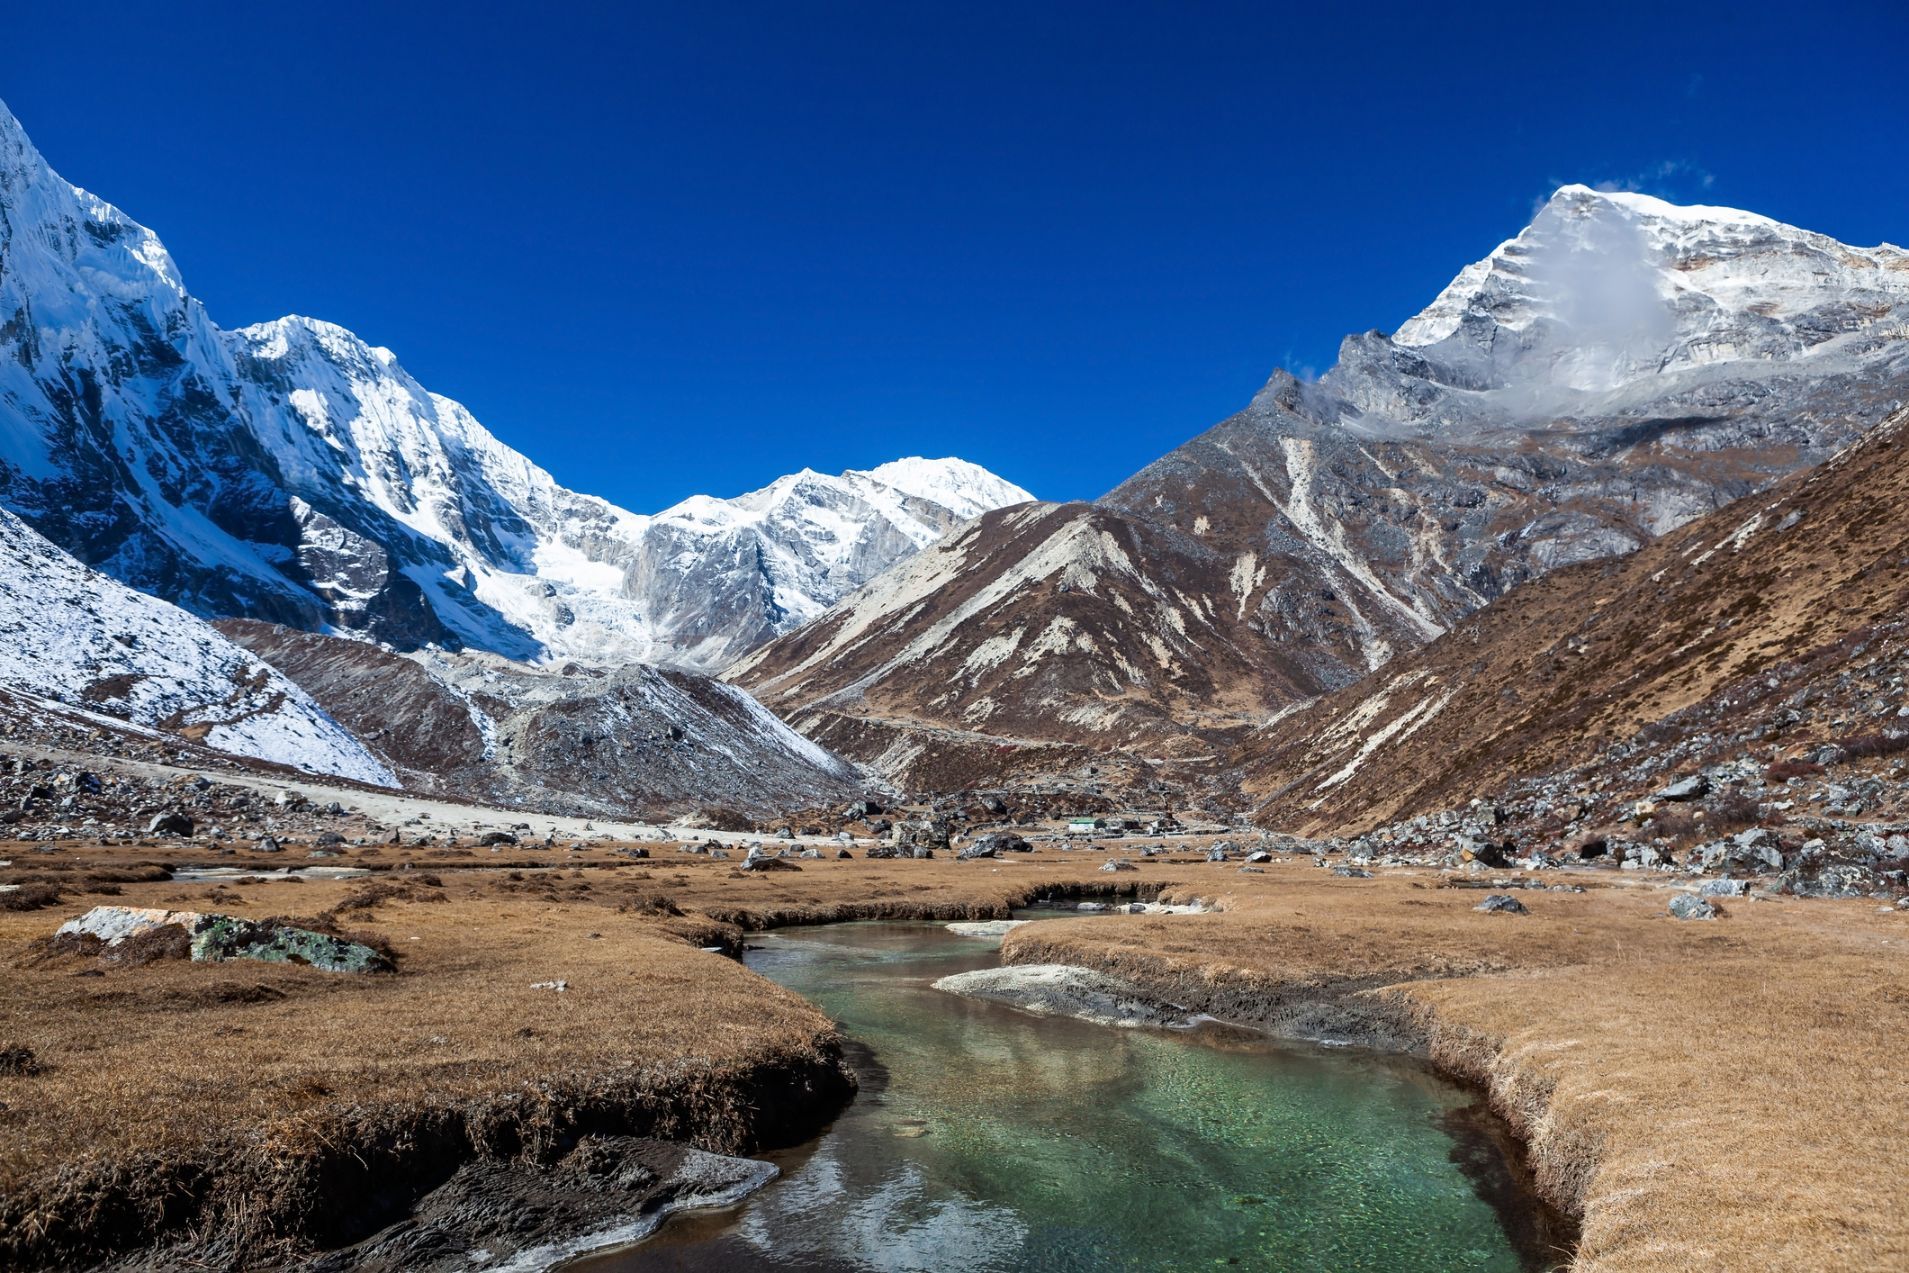 A beautiful Himalayan valley on the way to Tashi Lapcha pass. Taken in Khumbe valley on the Everest Base Camp line. 